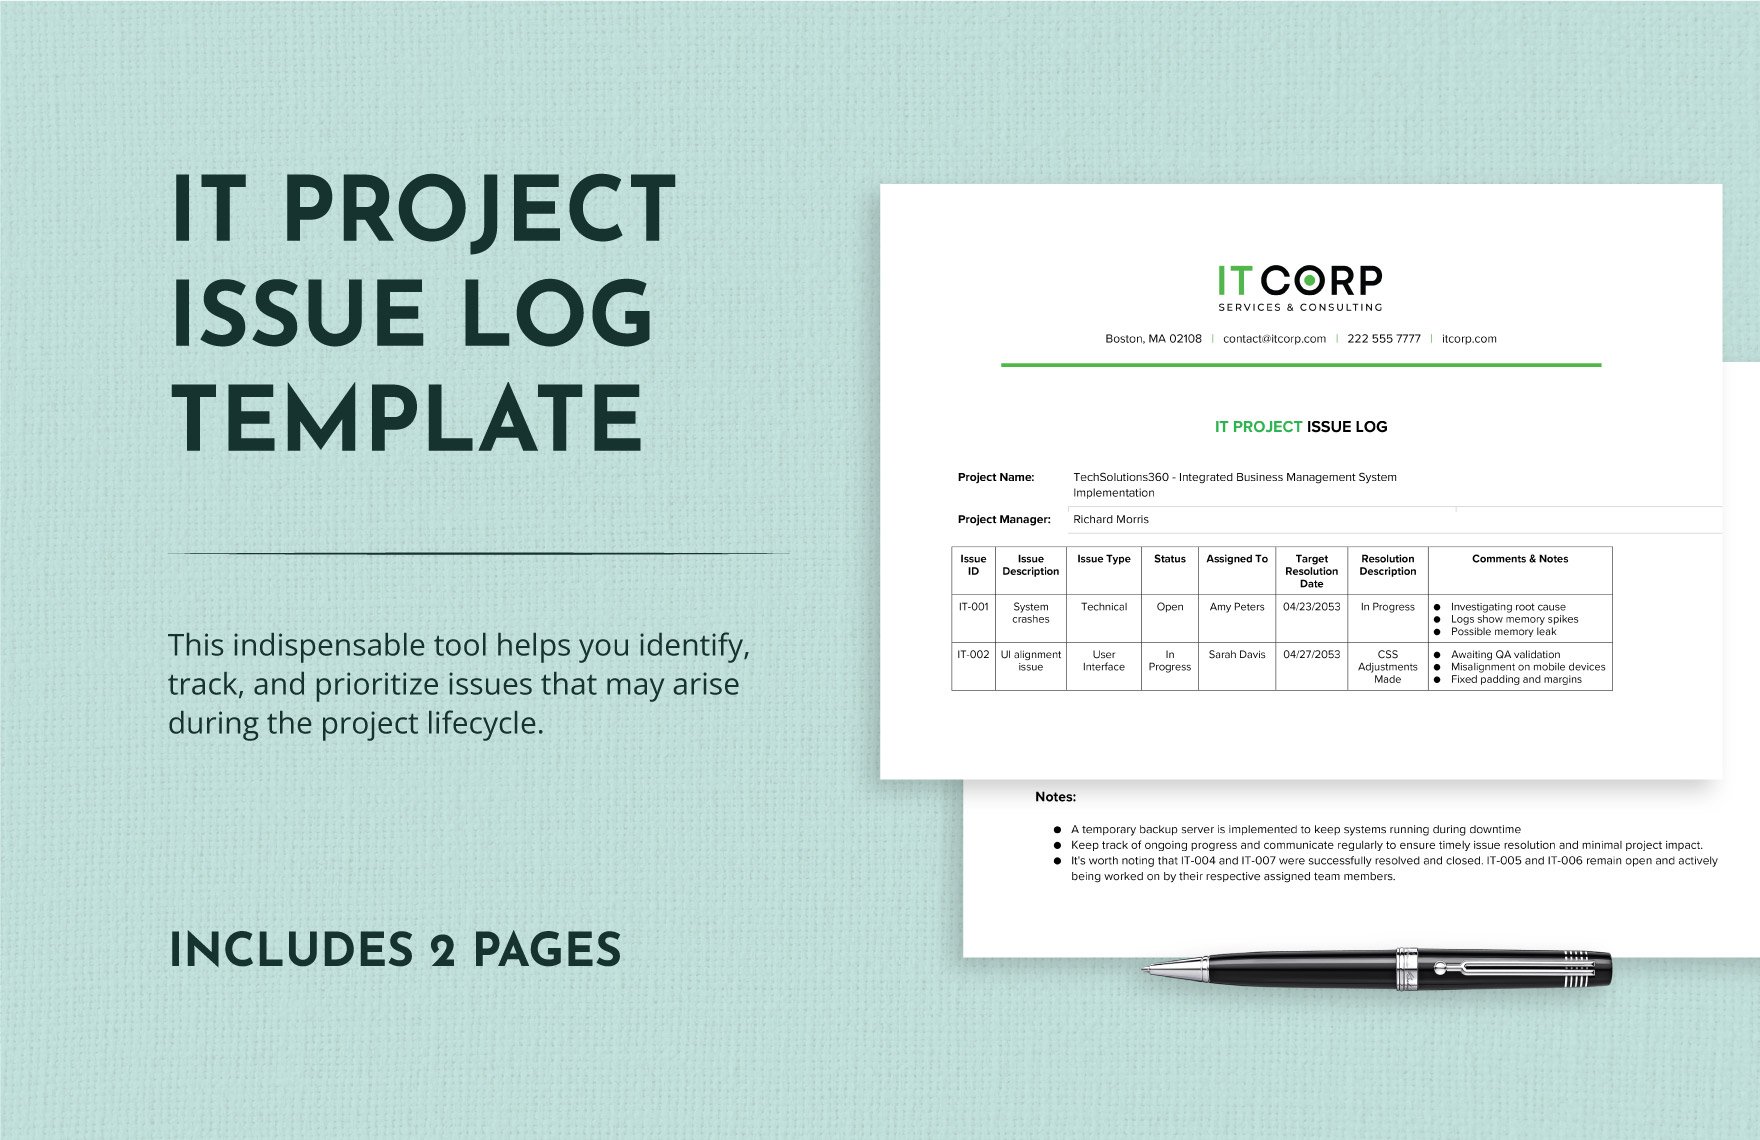 IT Project Issue Log Template